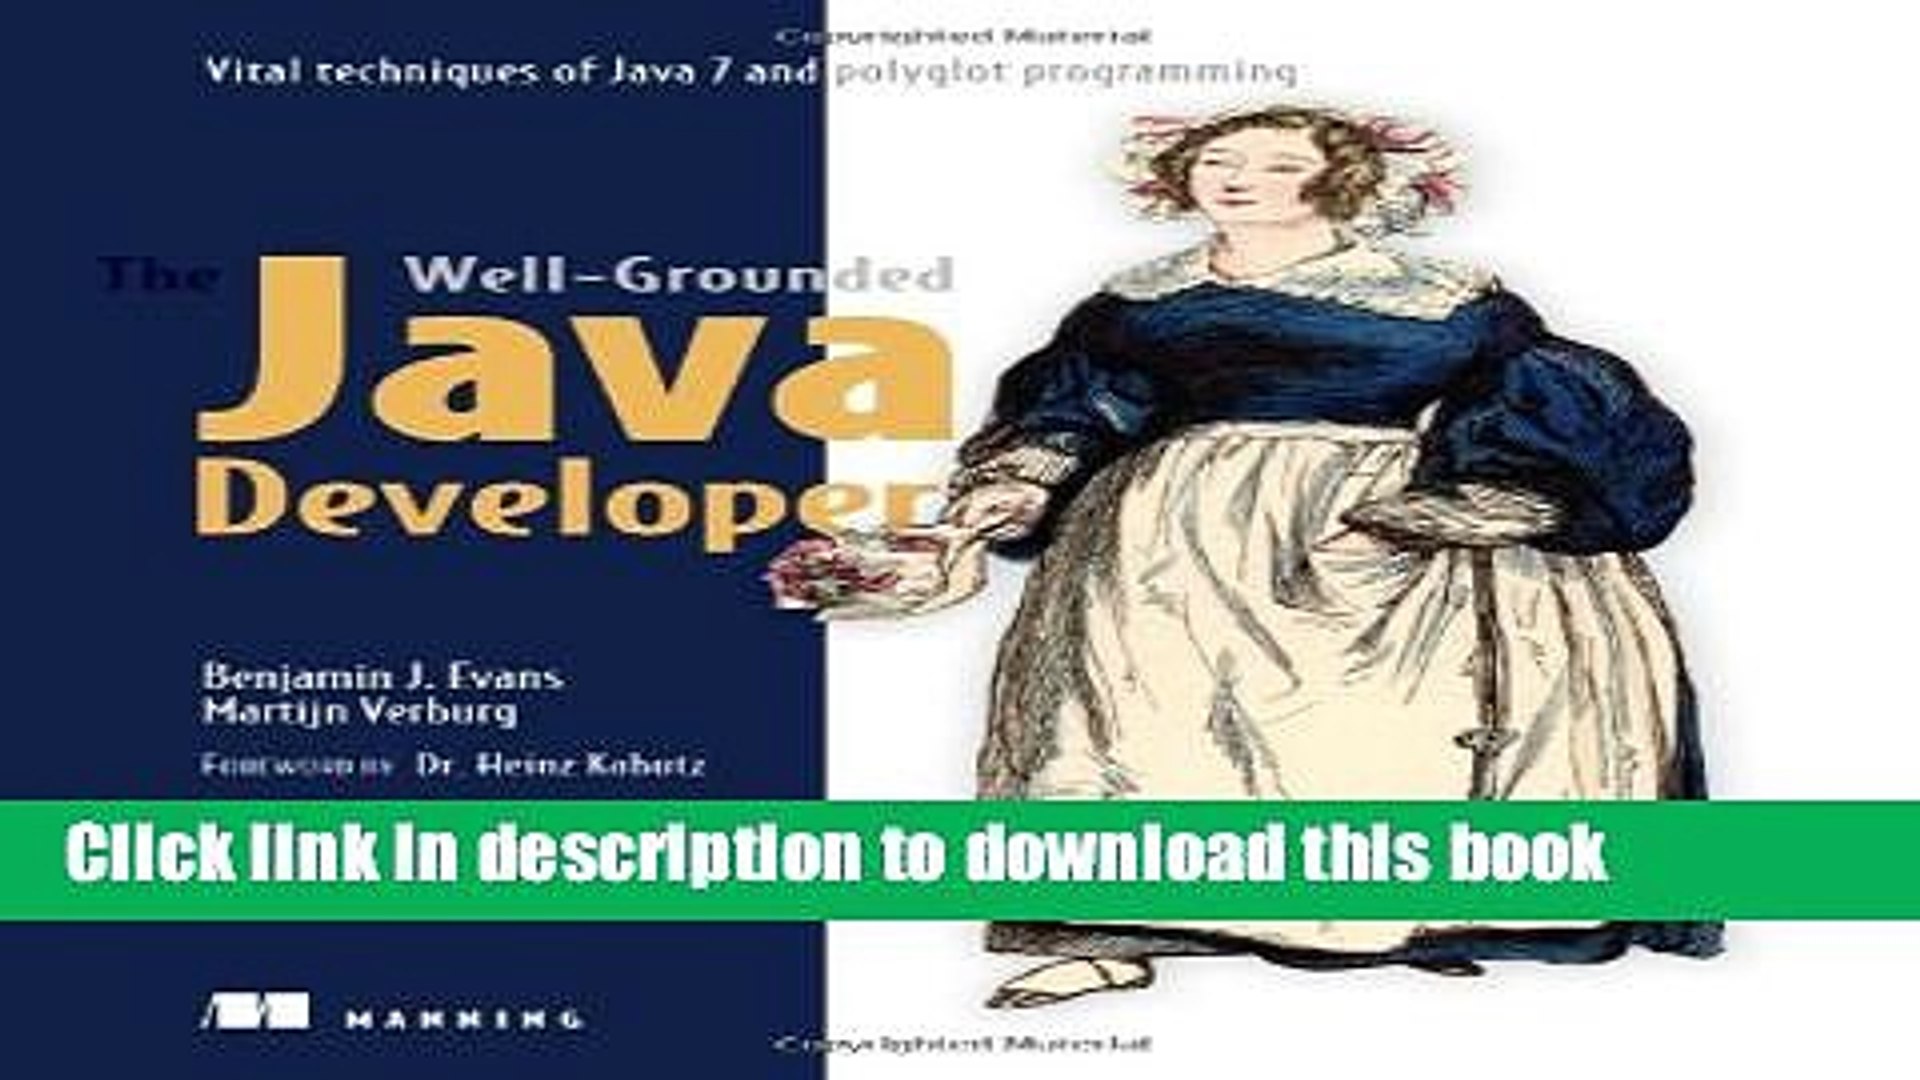 Ebook The Well-Grounded Java Developer: Vital techniques of Java 7 and polyglot programming Full